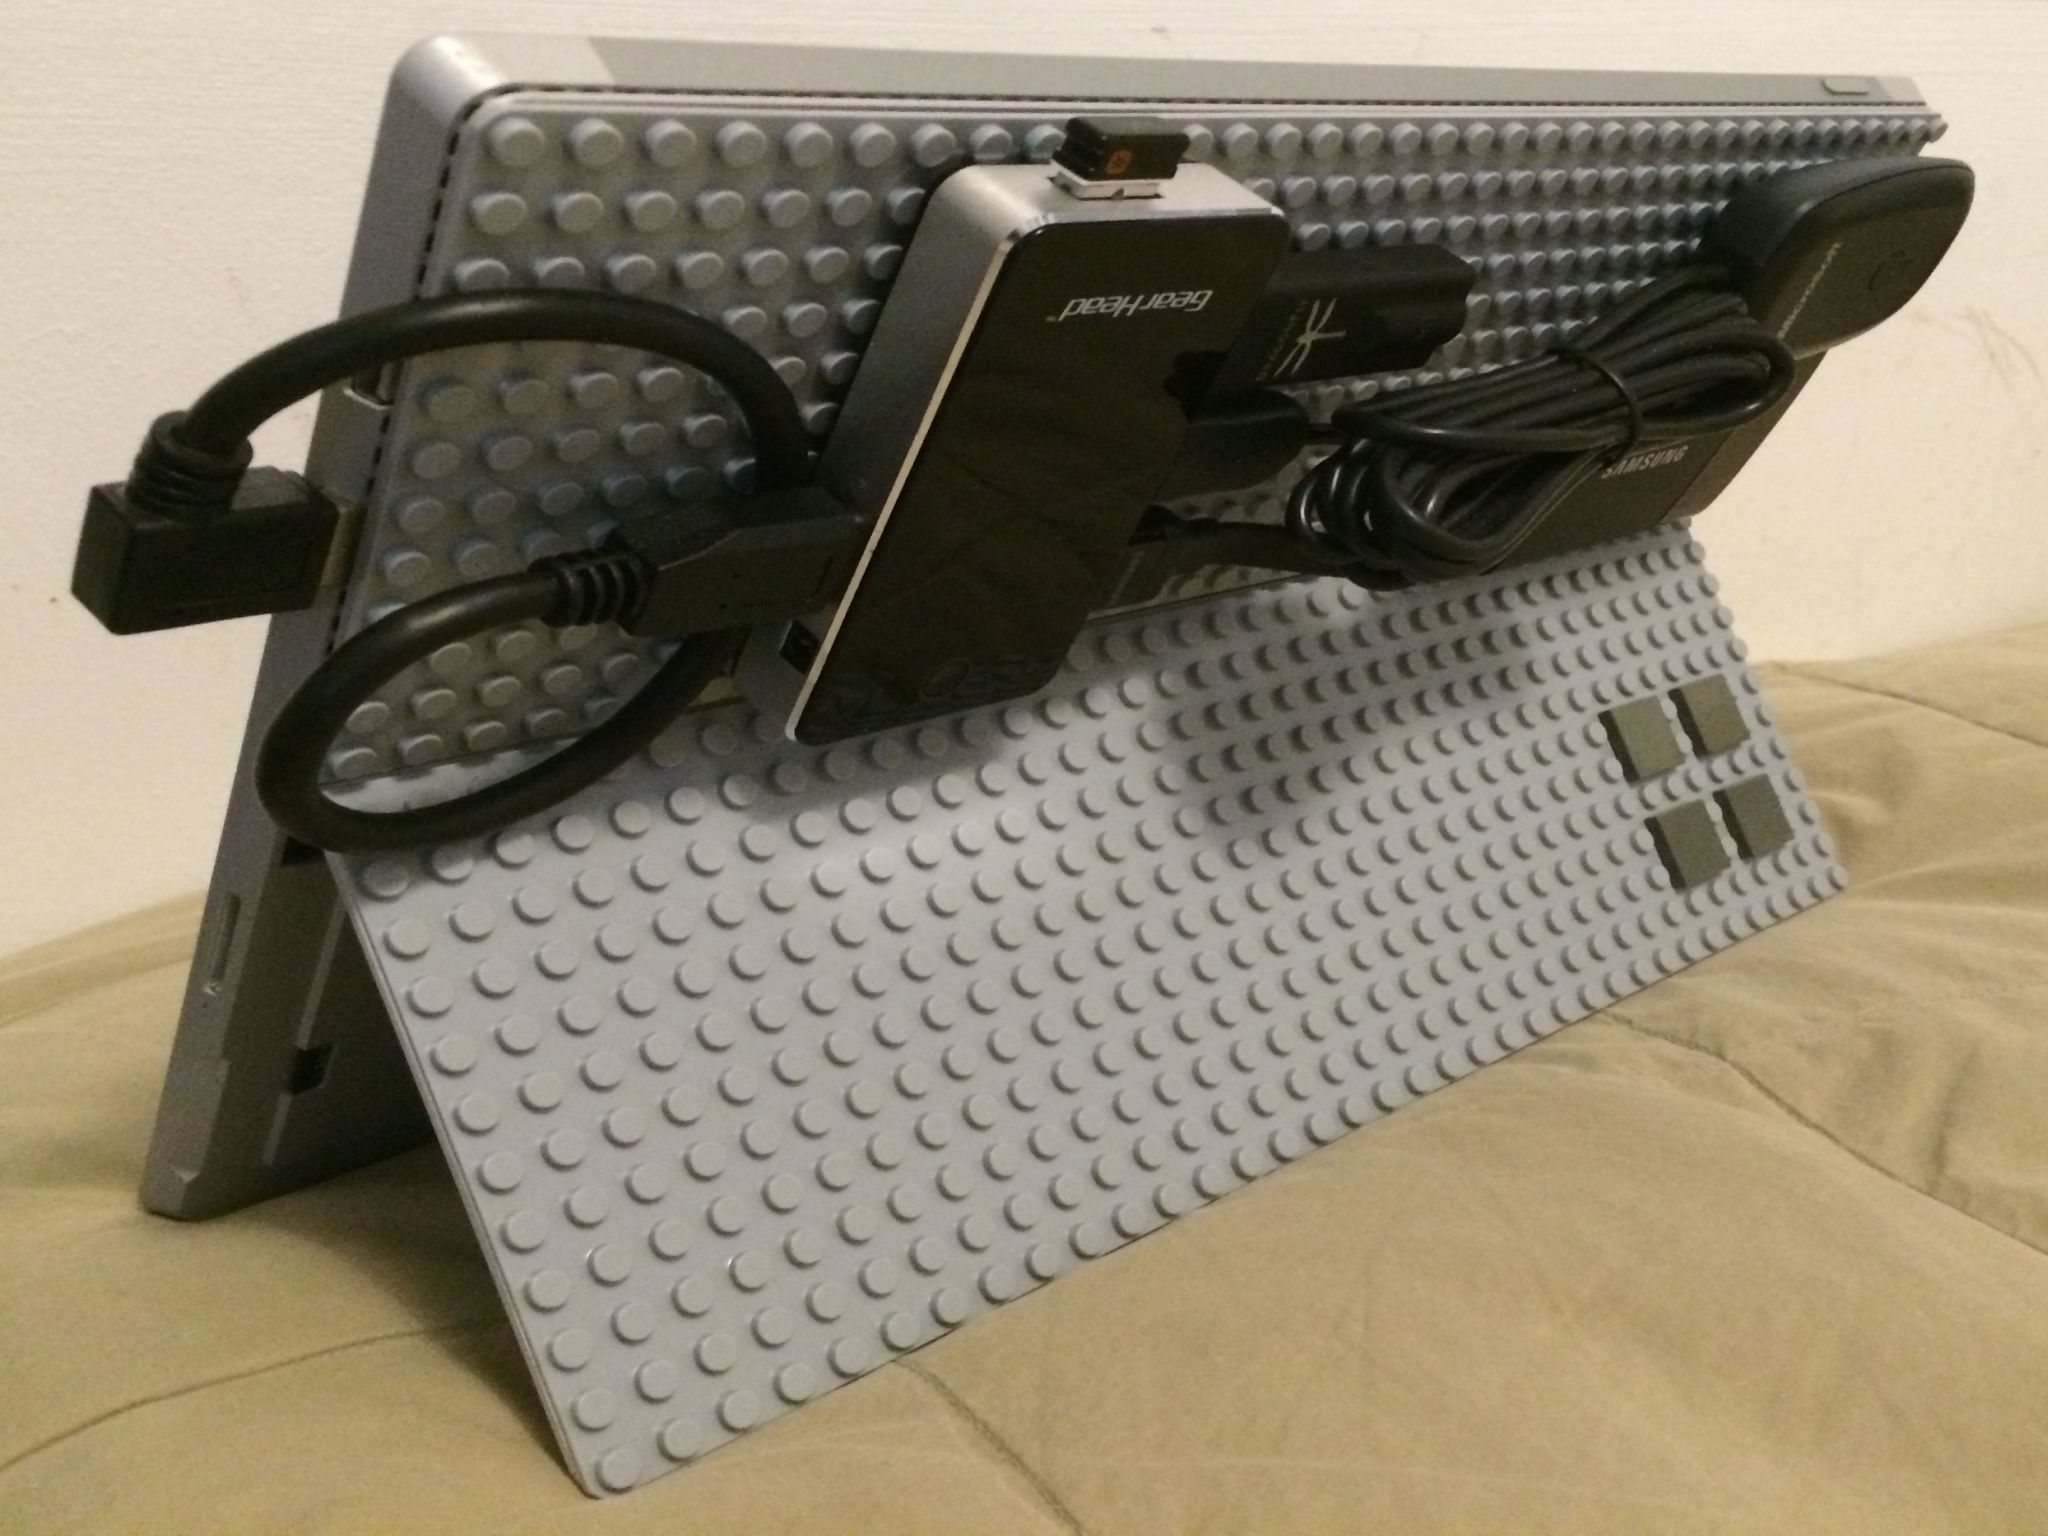 This simple but awesome mod brings Lego to the Surface Pro 3 